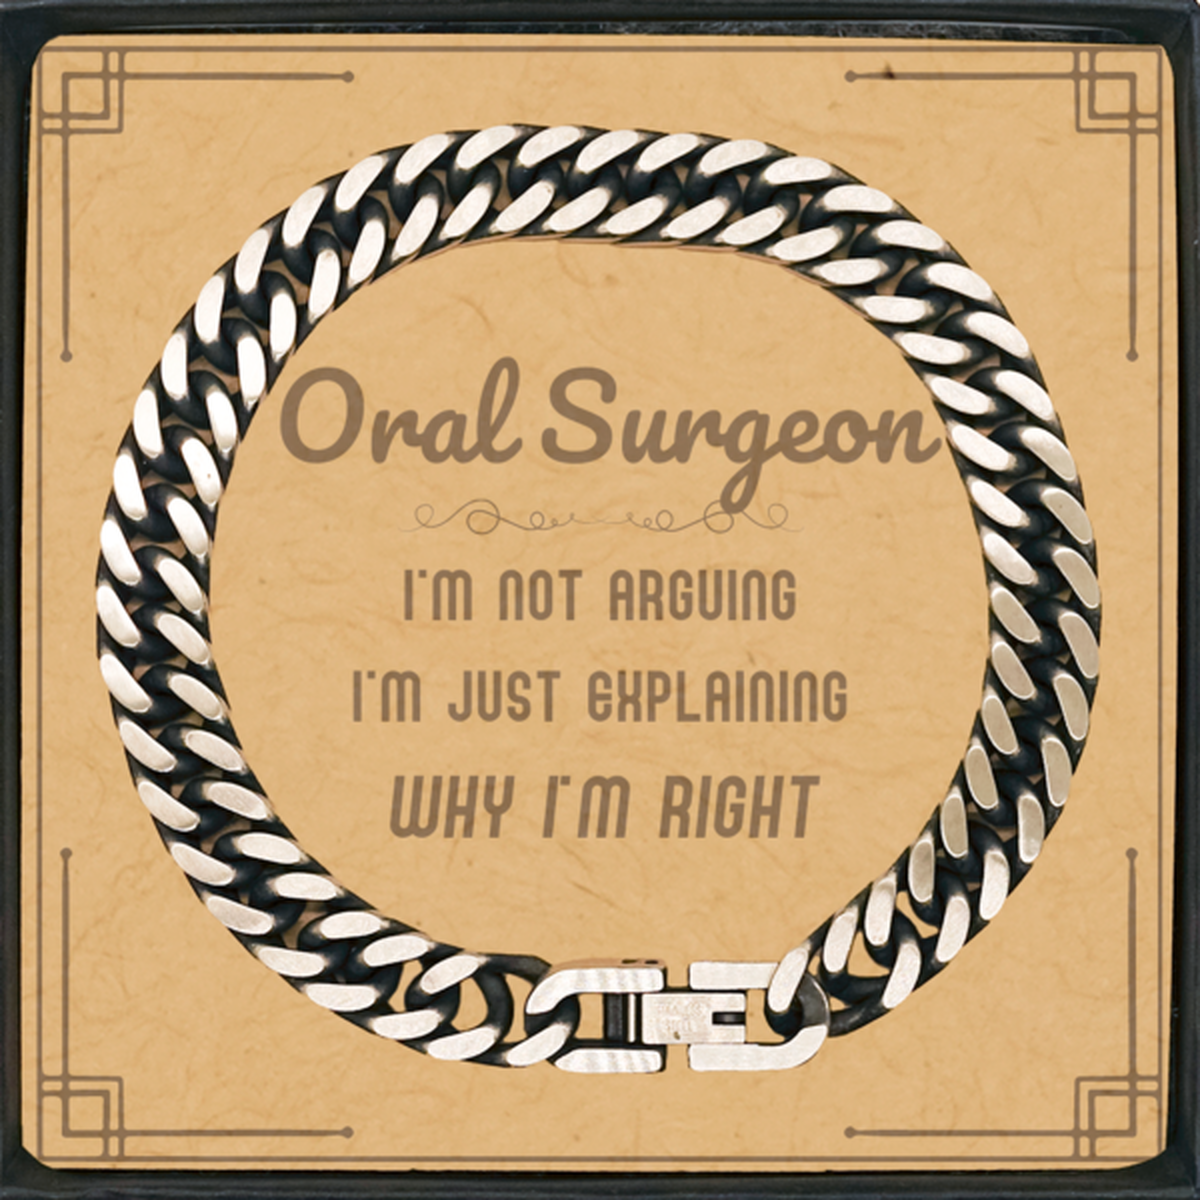 Oral Surgeon I'm not Arguing. I'm Just Explaining Why I'm RIGHT Cuban Link Chain Bracelet, Funny Saying Quote Oral Surgeon Gifts For Oral Surgeon Message Card Graduation Birthday Christmas Gifts for Men Women Coworker